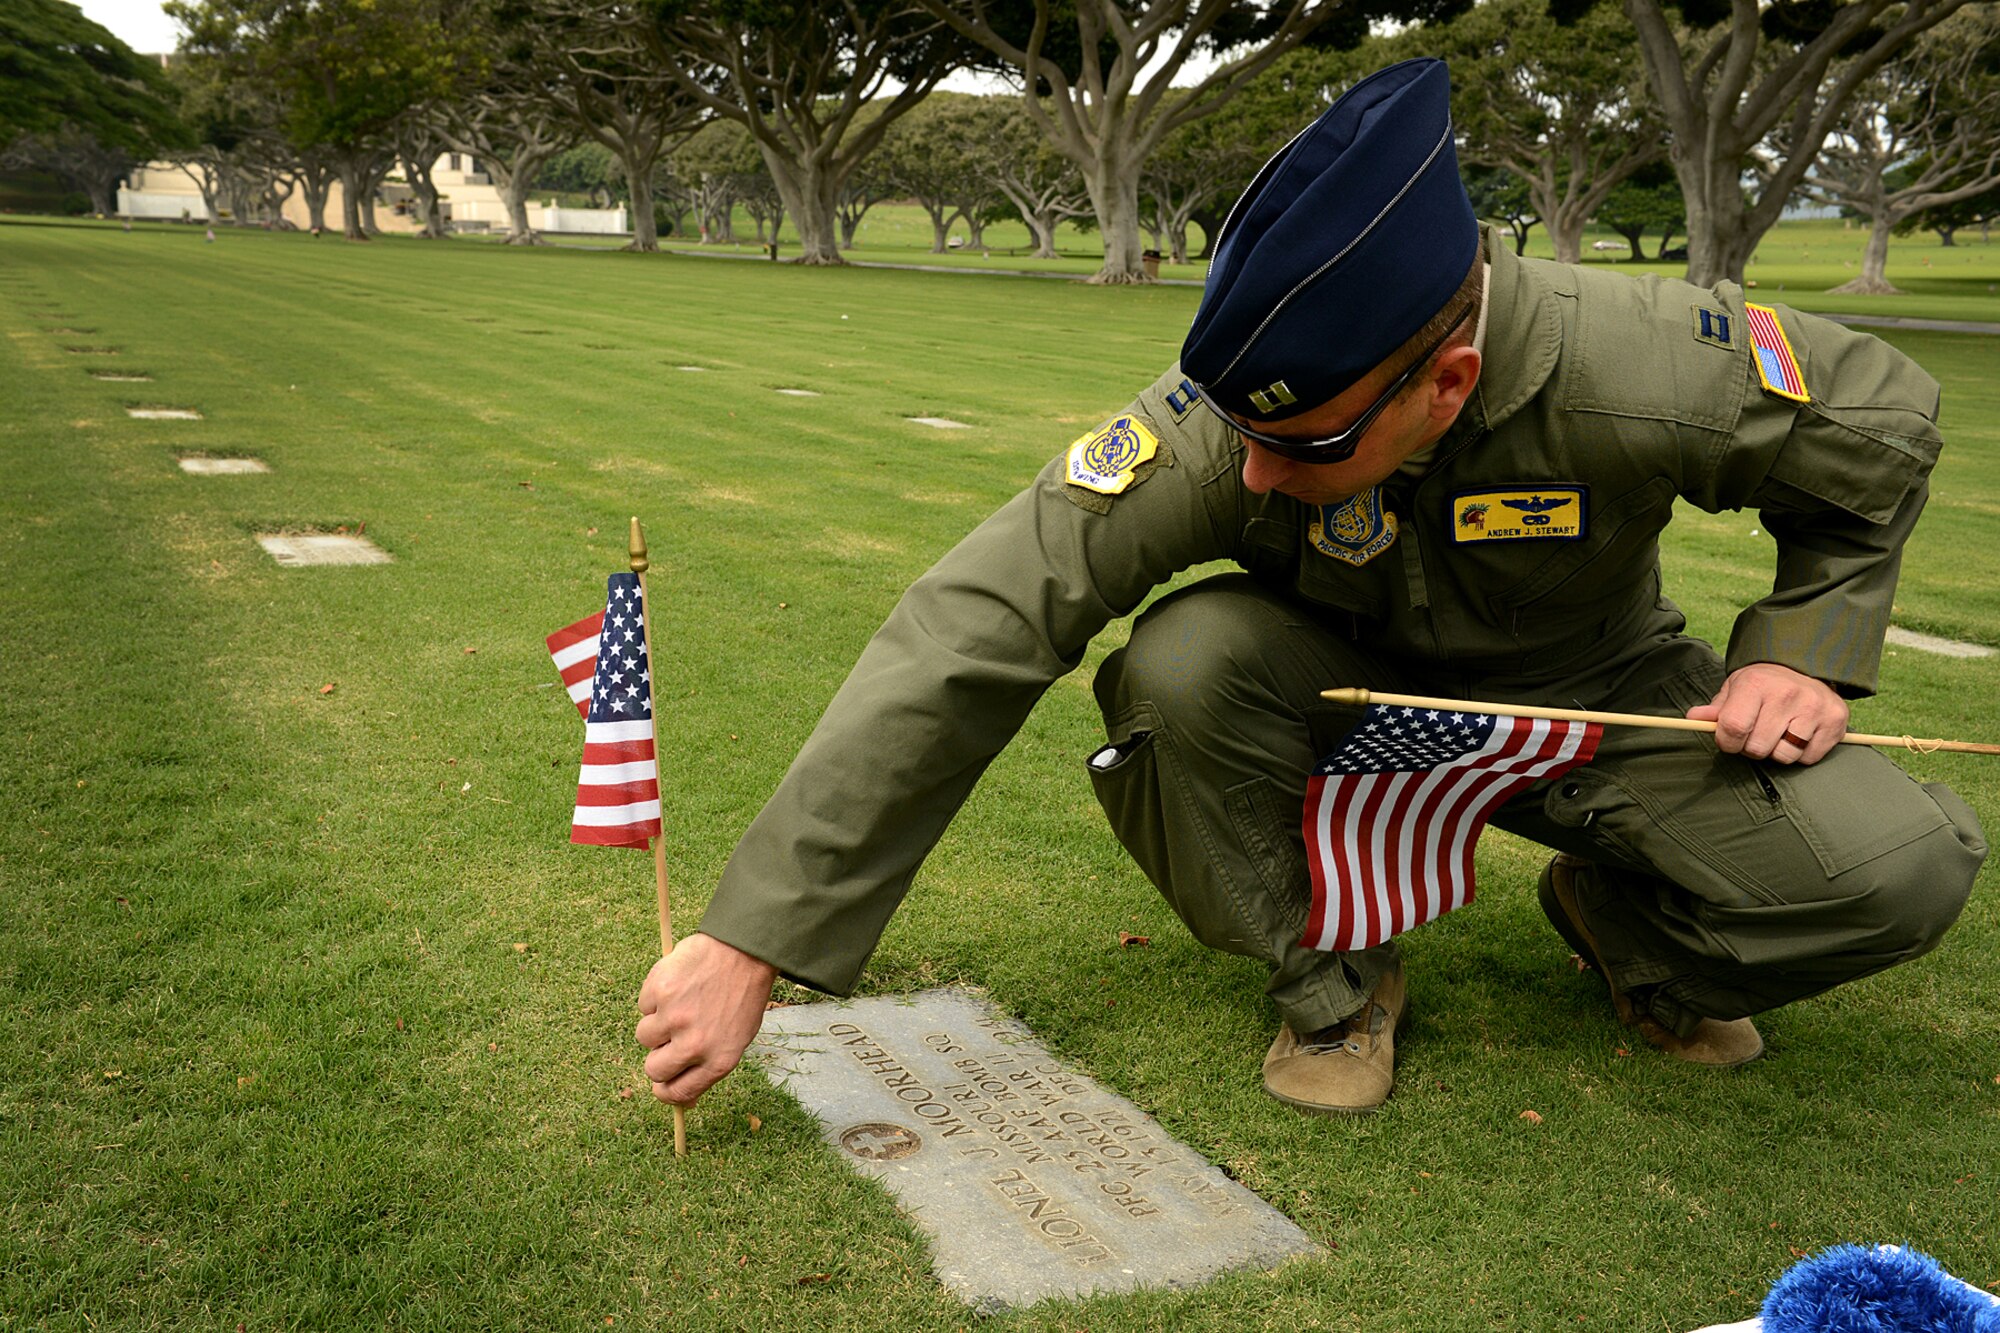 Capt. Andy Stewart, 15th Wing commander’s Action Group, places an American flag and handmade lei at the top of a gravesite, Dec. 2, 2012, at the National Cemetery of the Pacific, at Punchbowl in Honolulu. Stewart, and nine other volunteers placed 92 flags among the 34,000 gravesites on the grounds of the cemetery to honor the men who lost their lives at Hickam Field on Dec. 7, 1941. Stewart cleaned debris from each of the gravesites he placed a marker and saluted each Airman. (U.S. Air Force photo/Staff Sgt. Mike Meares)